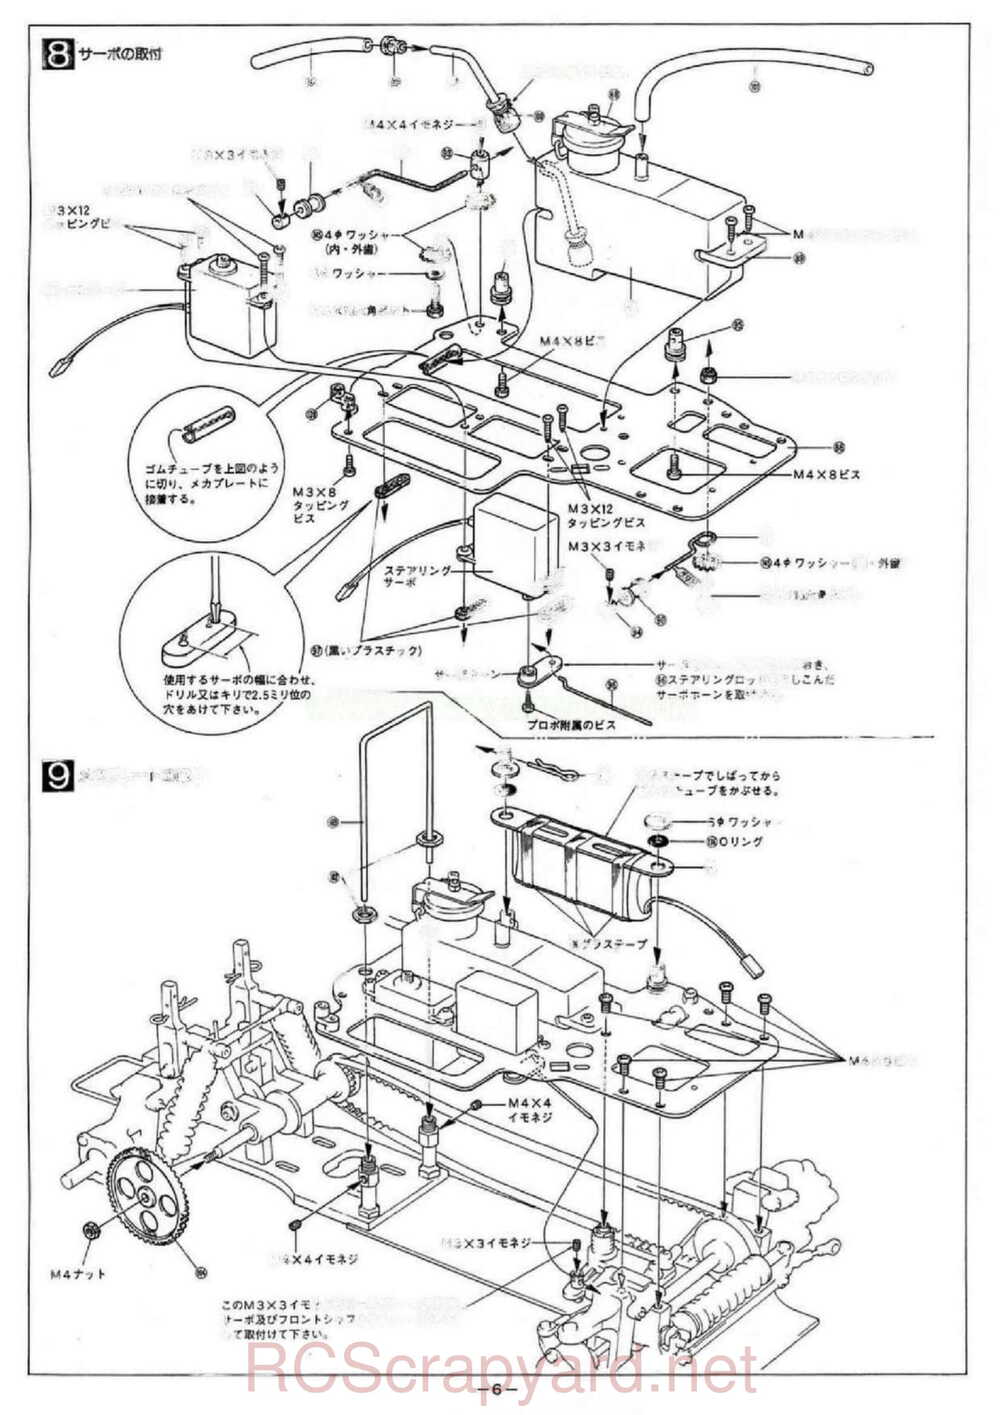 Kyosho - 3121 - Fantom-21 4iS - Manual - Page 06